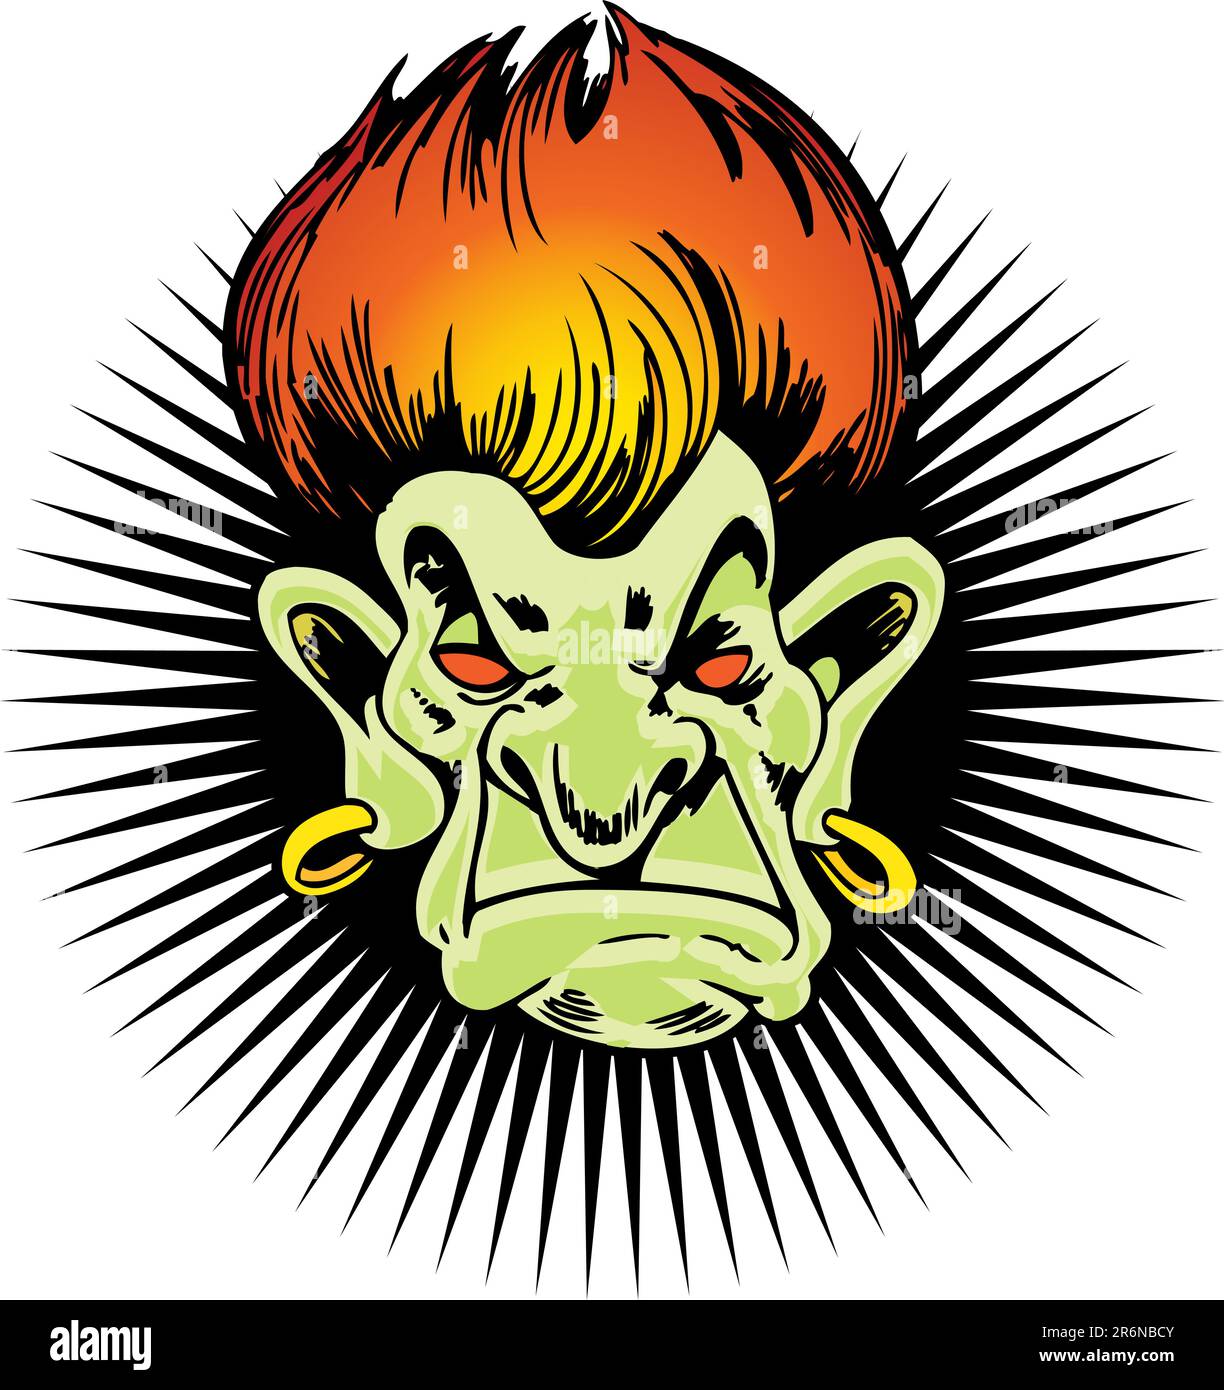 Head of a troll with fiery hair and a starburst background. Stock Vector